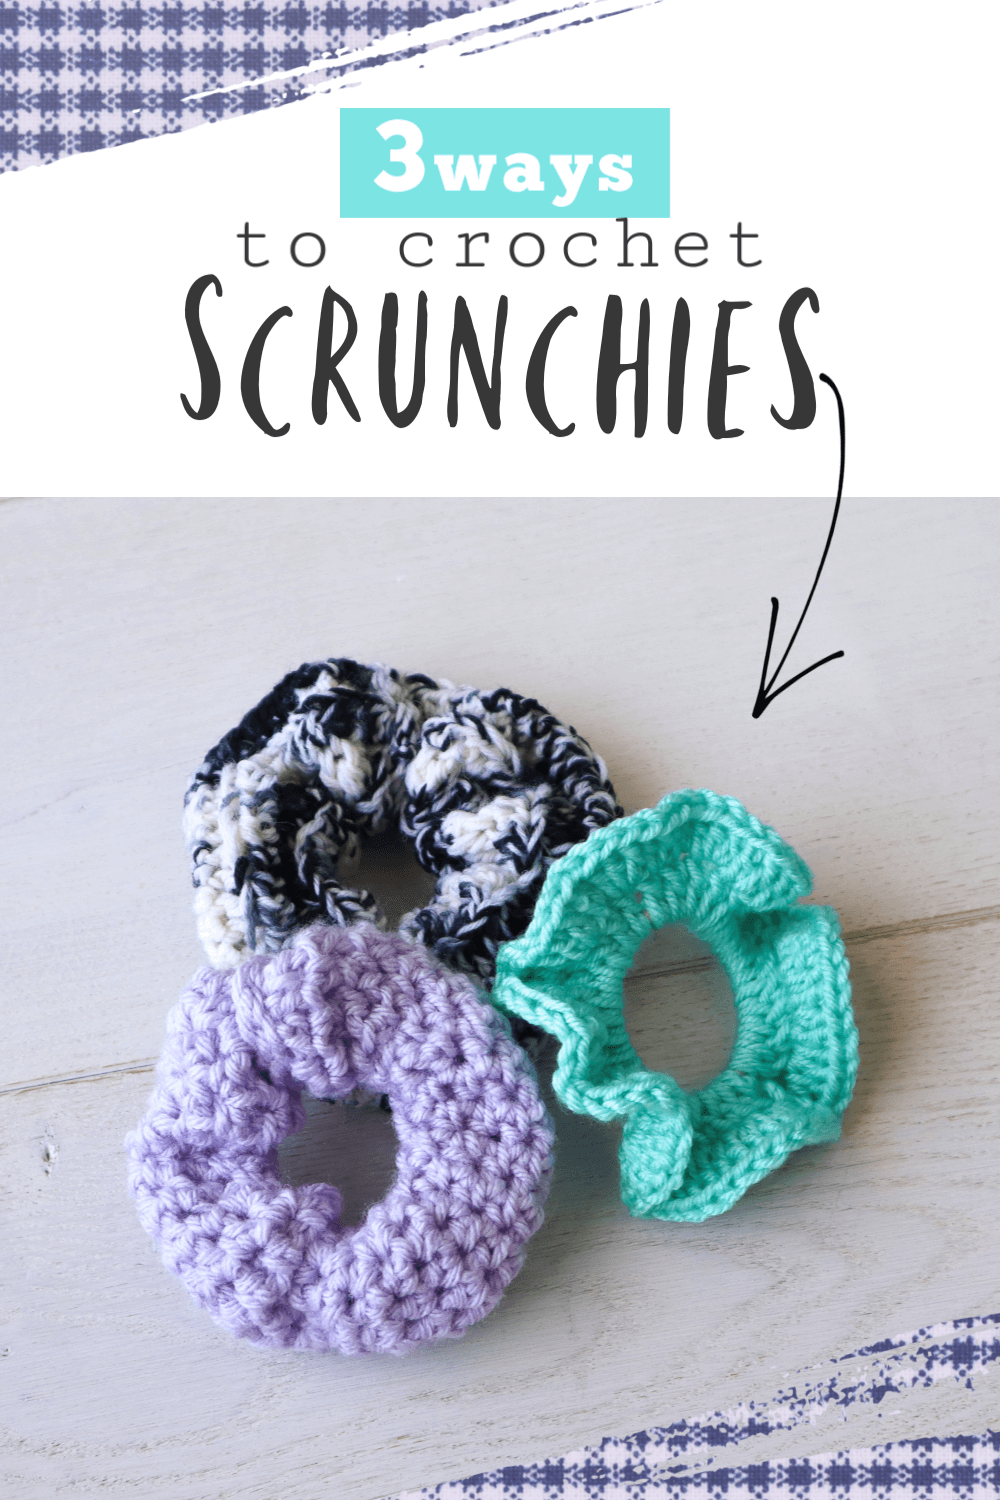 How to Crochet a Scrunchie 3 Ways - The Snugglery